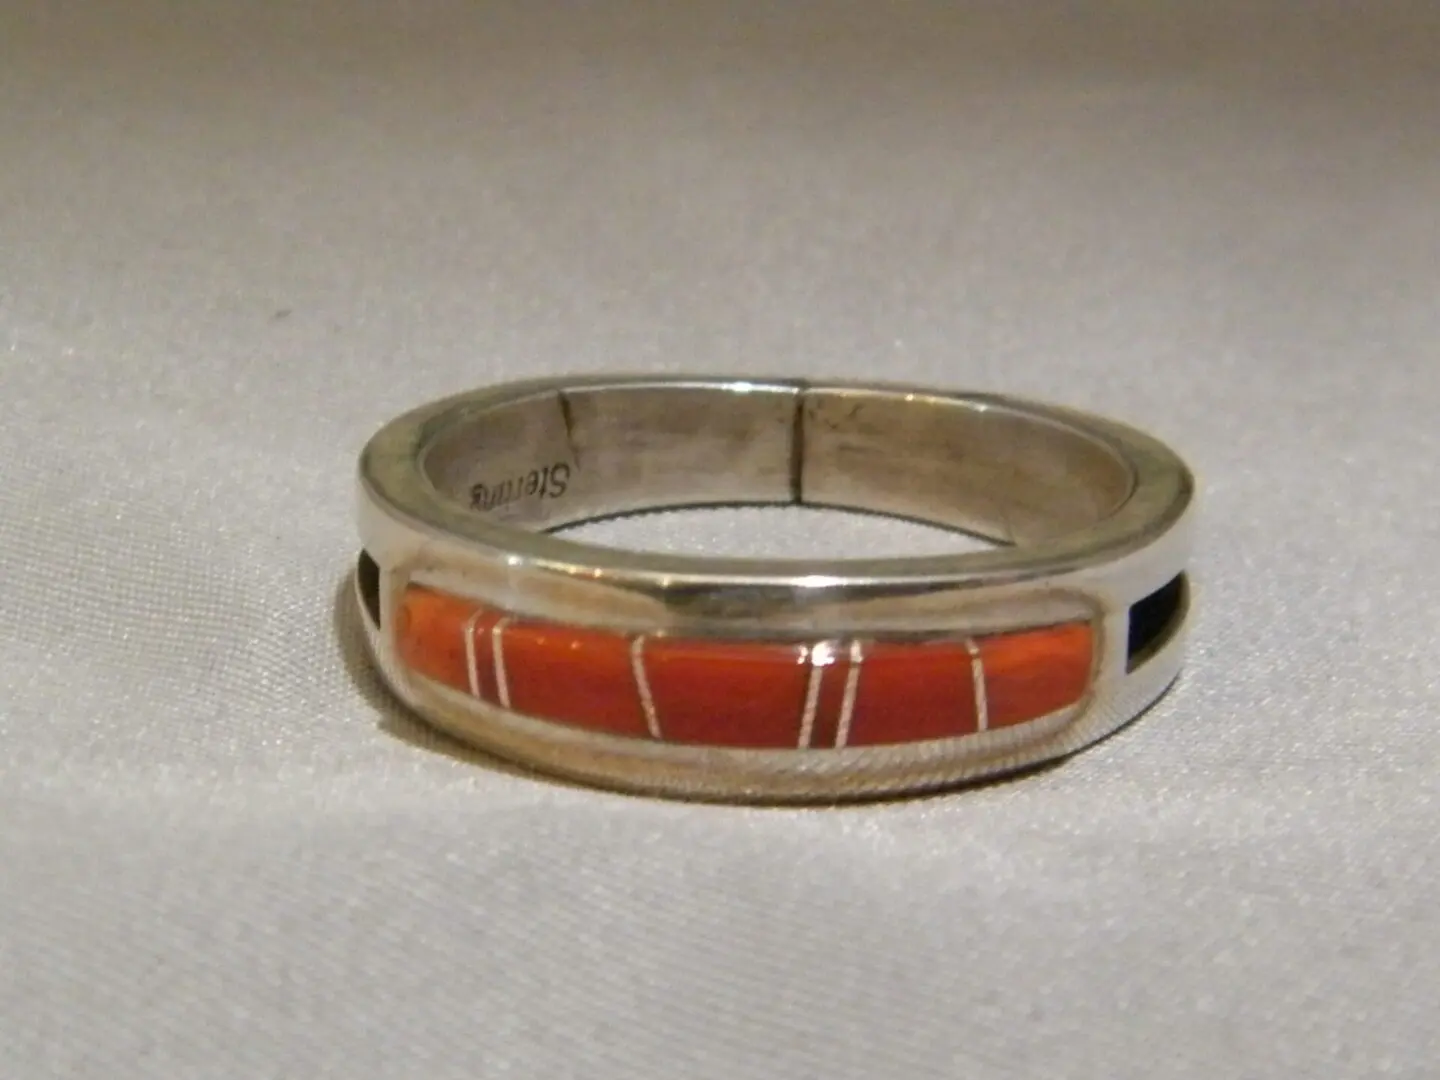 A Silver Ring With Orange Stone and Gold Lines